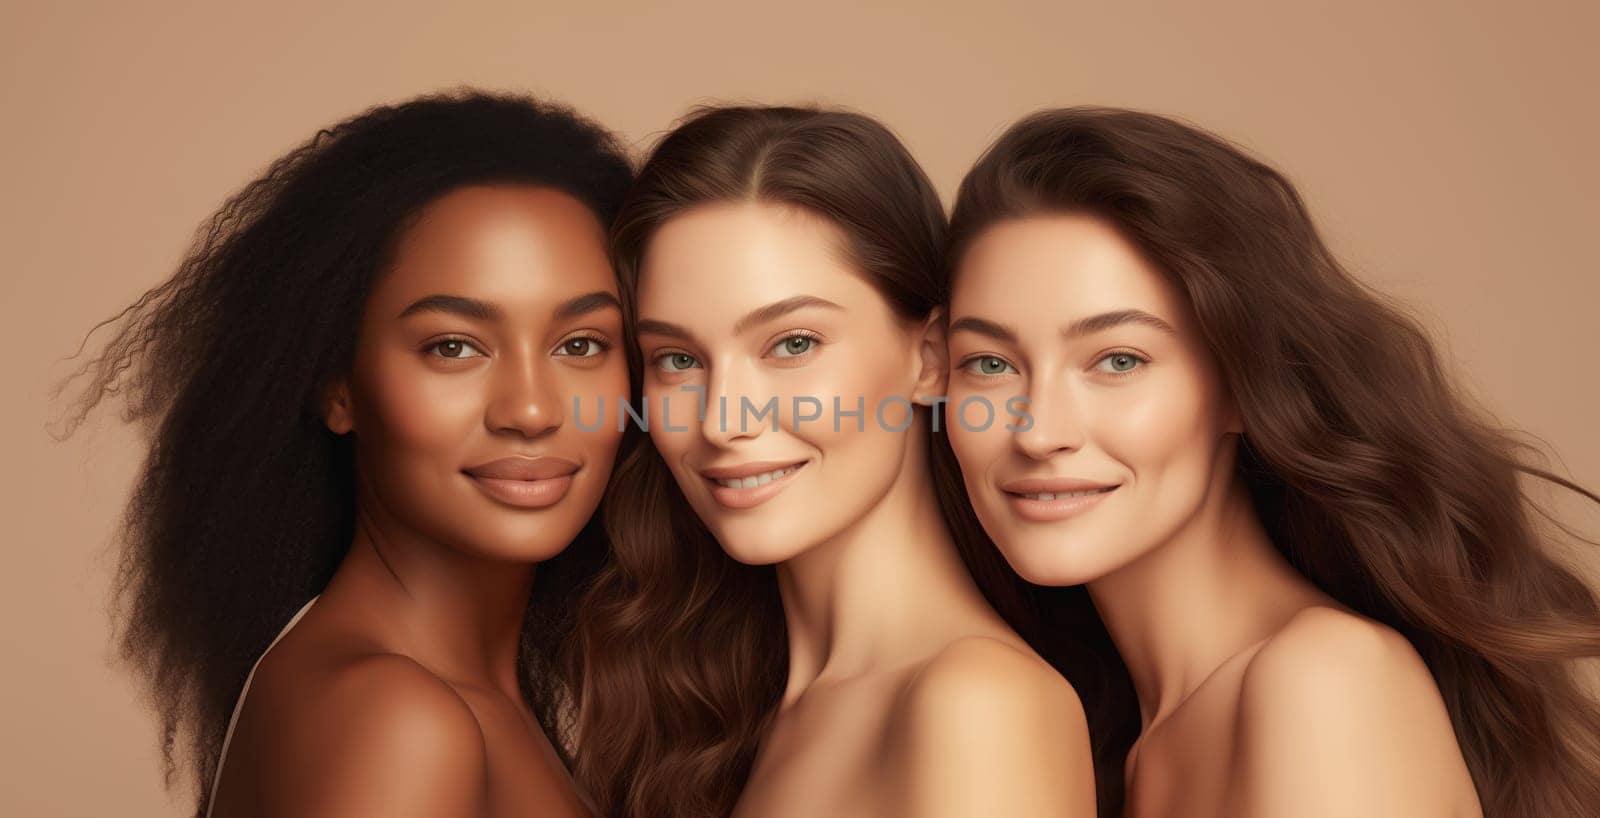 Beauty portrait of three multiethnic diverse young women with clean healthy skin, beautiful lovely female models posing together on studio background